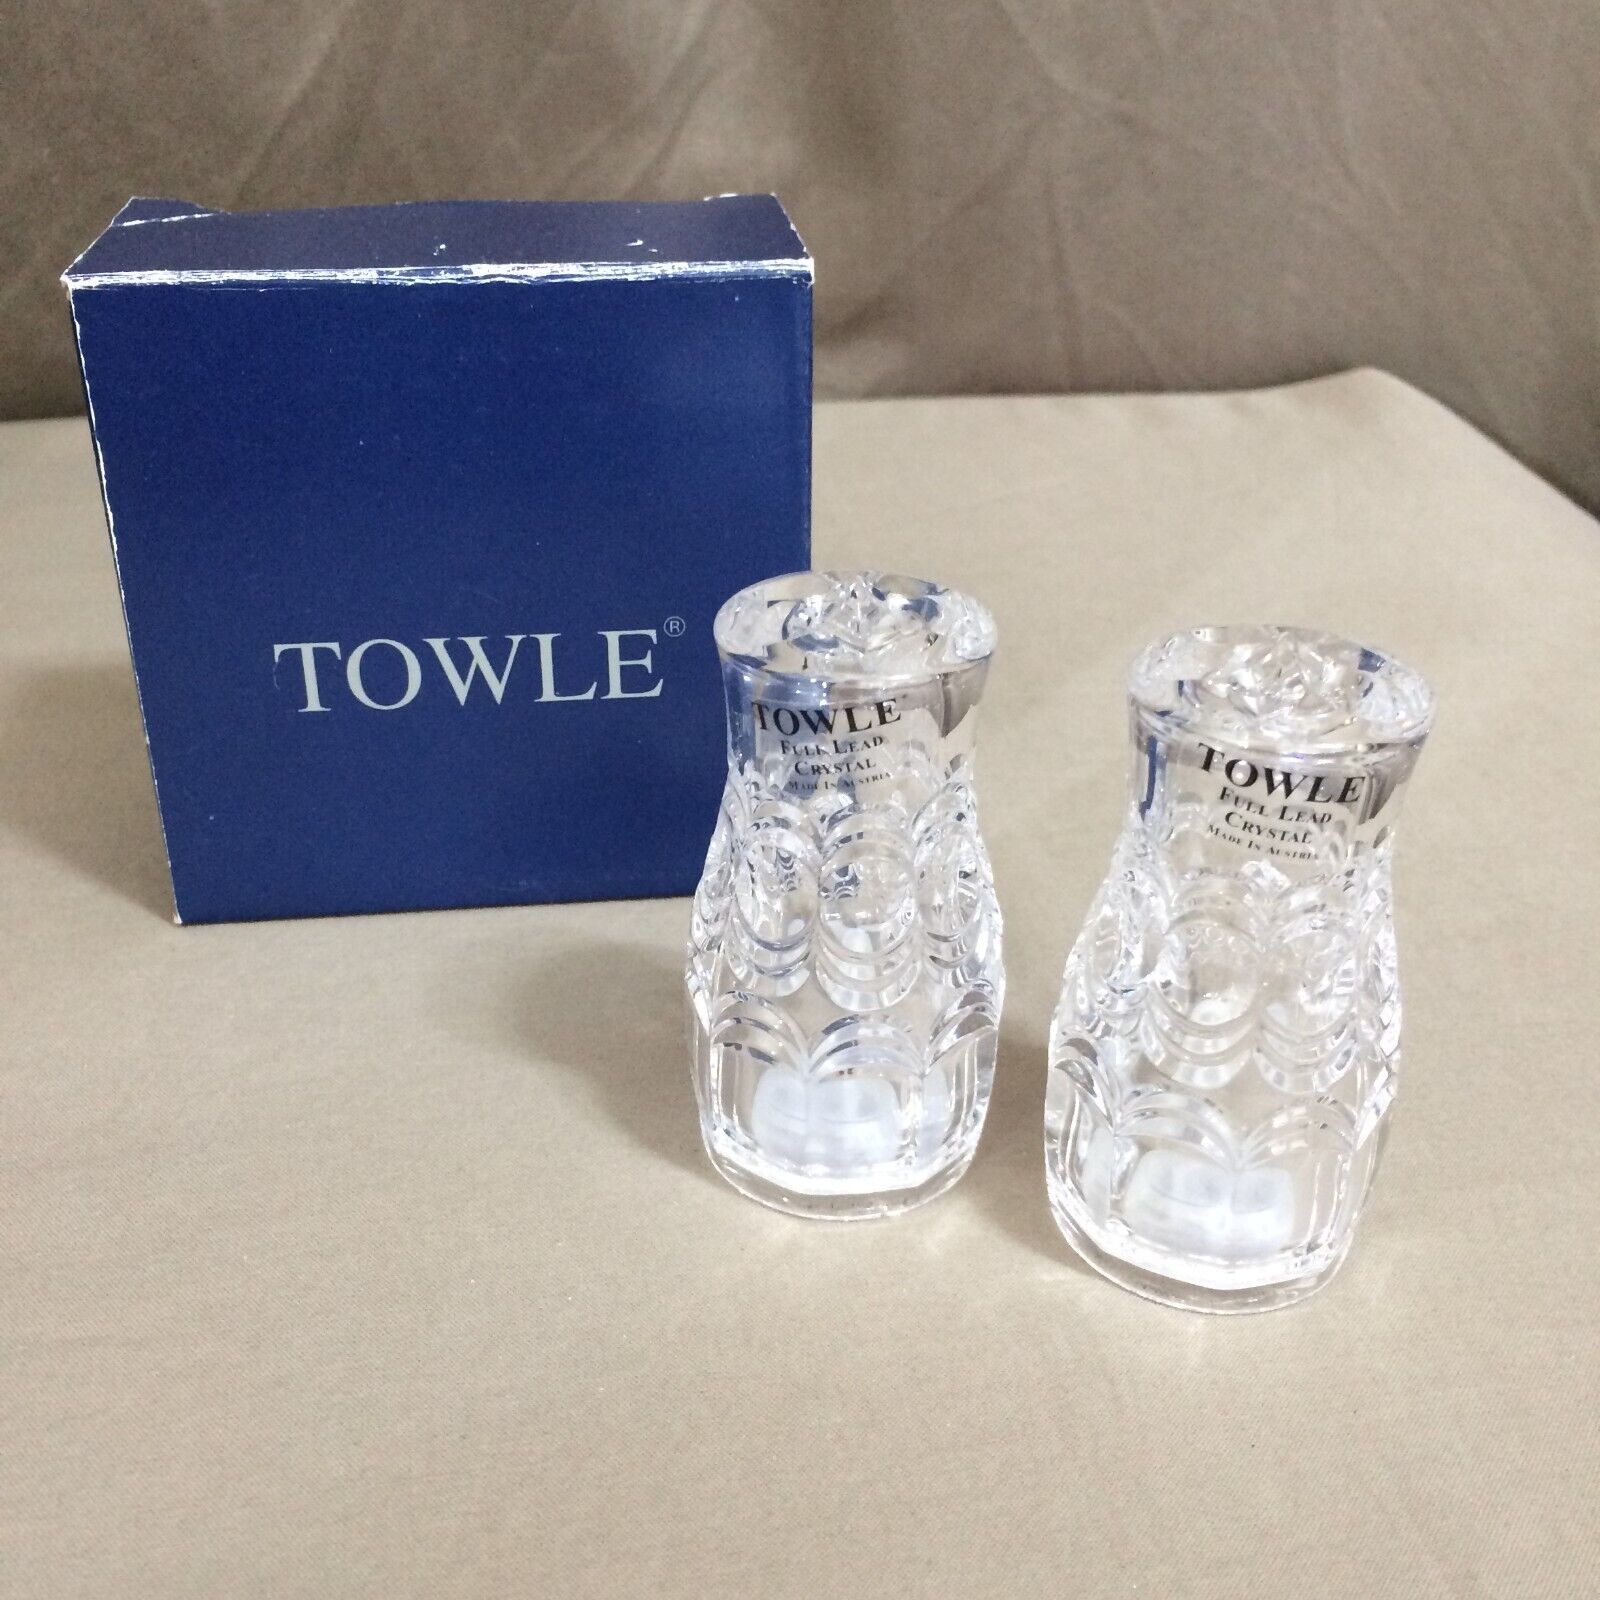 NEW Towle Salt & Pepper Full Lead Crystal Mozart Made in Austria with Box